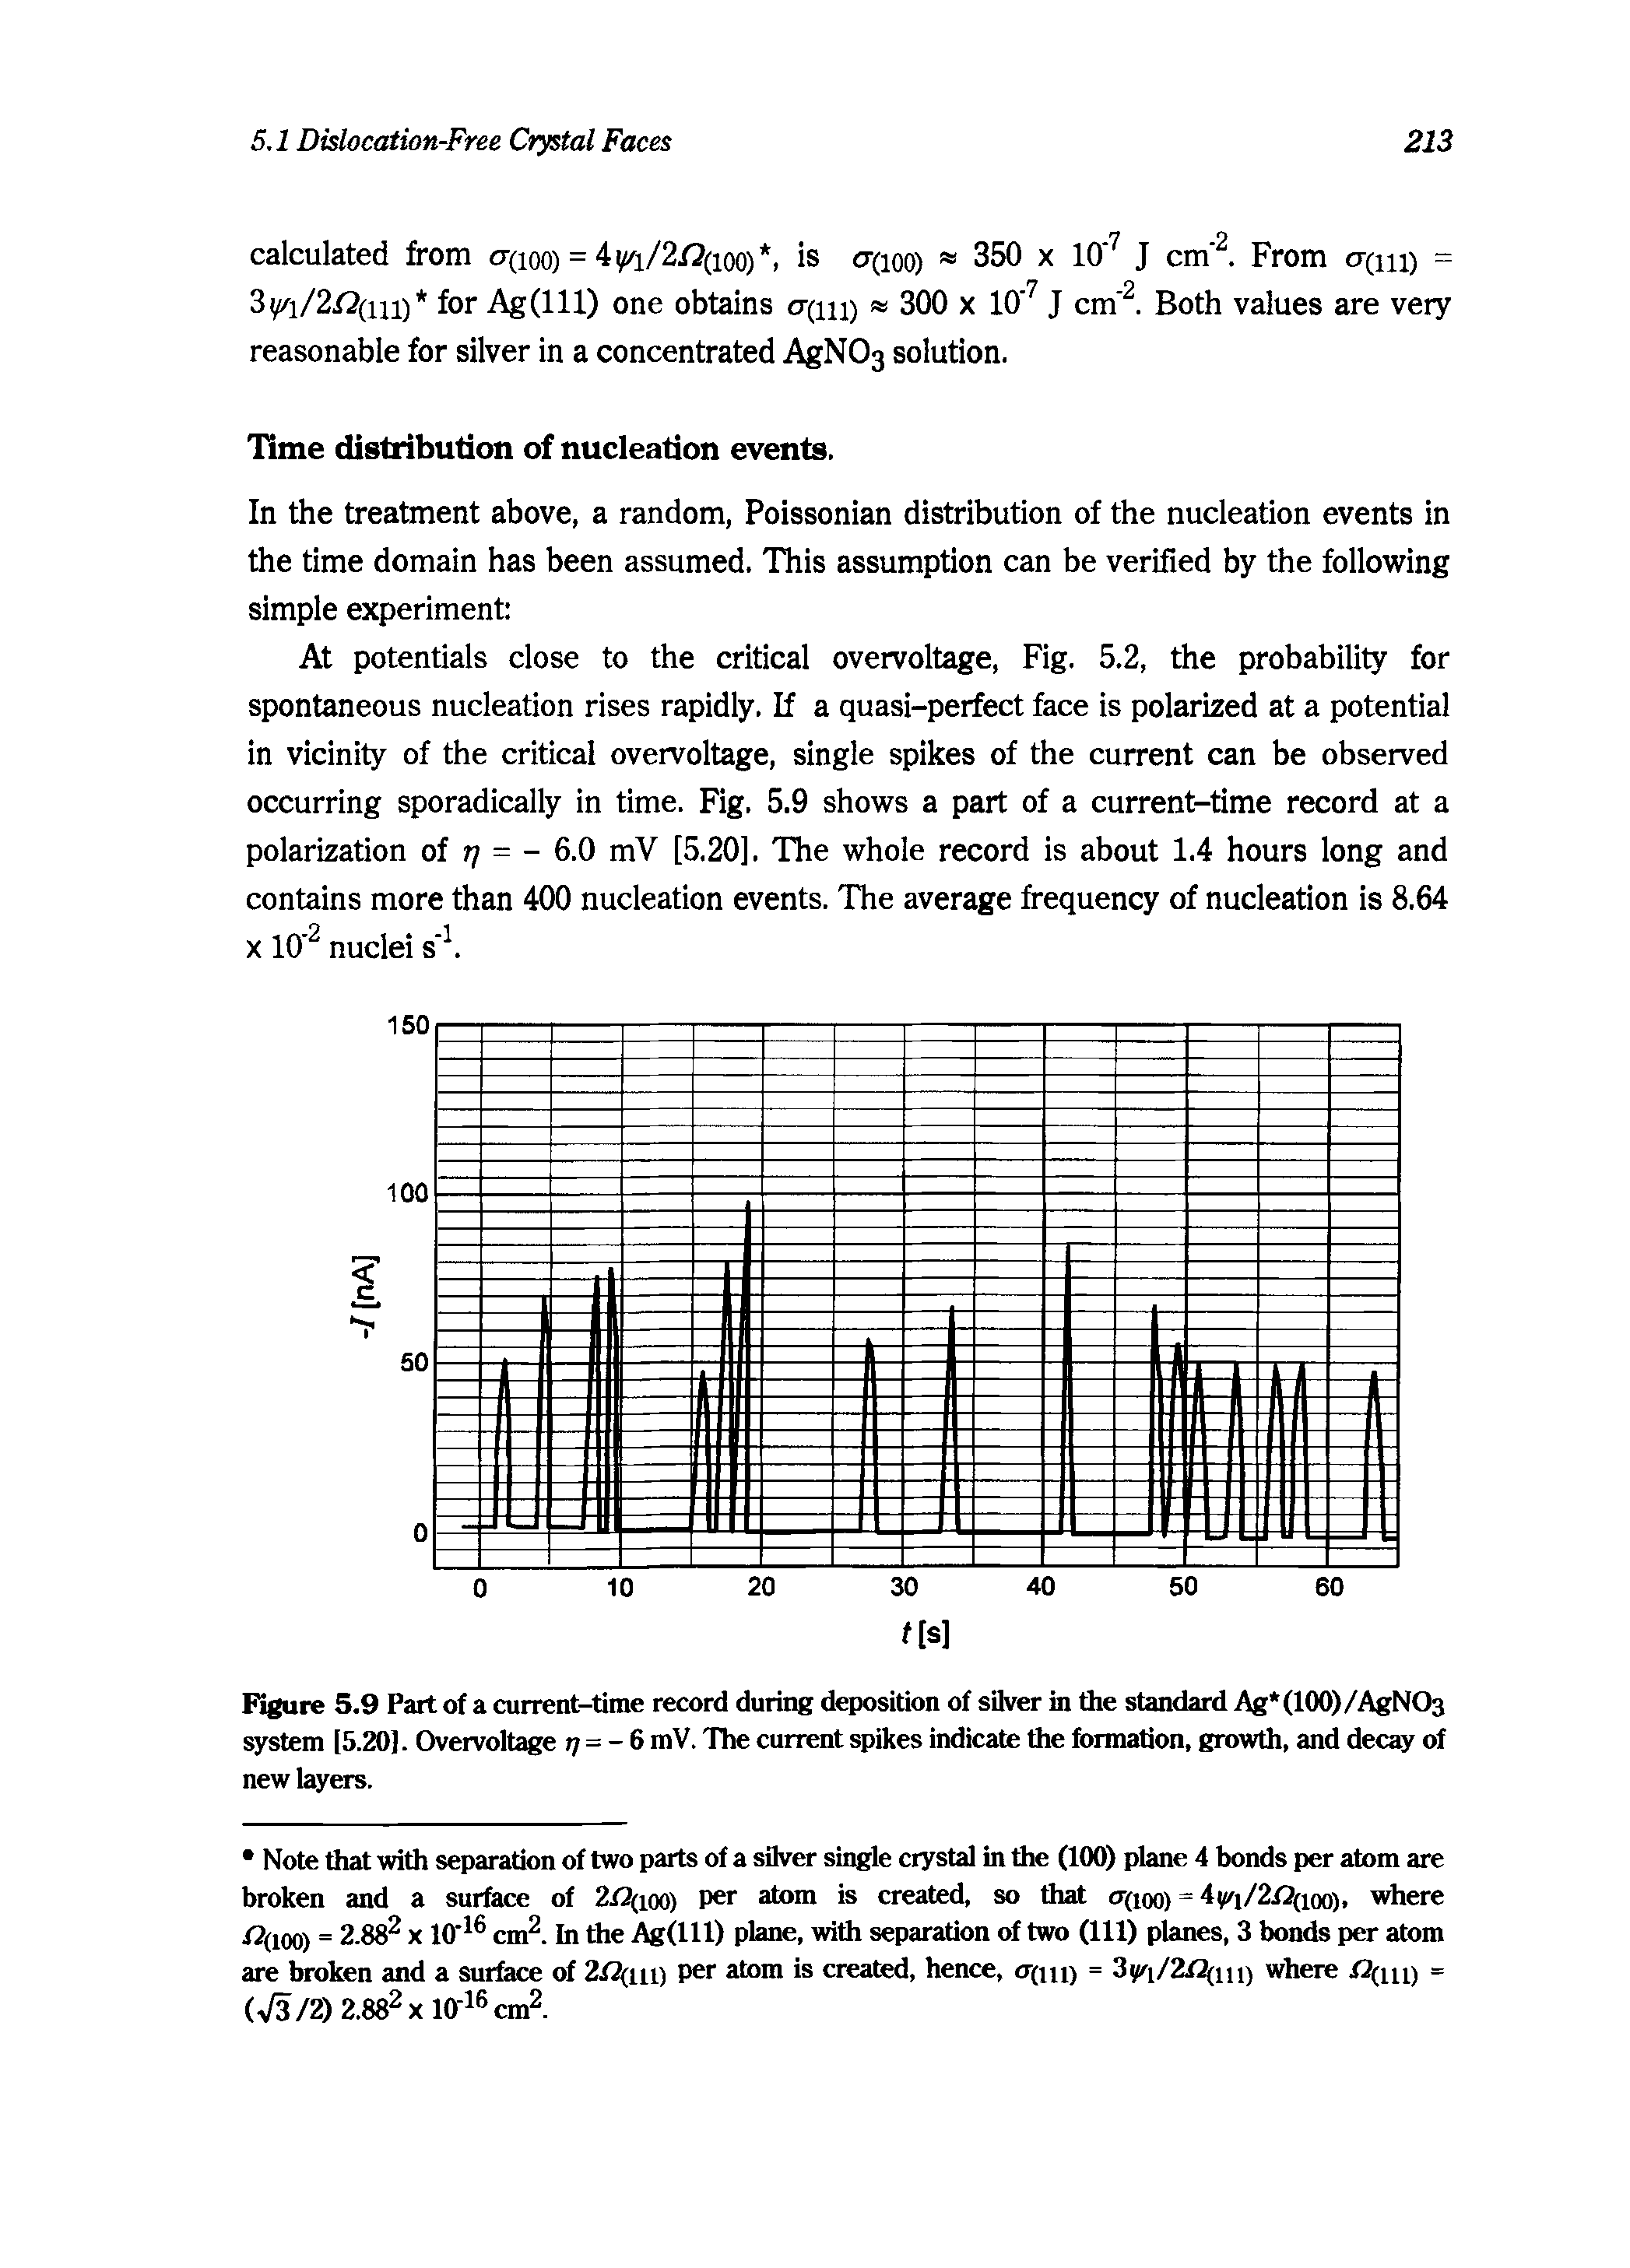 Figure 5.9 Part of a current-time record during deposition of silver in the standard Ag (100)/AgN03 system [5.20]. Overvolt e rj =-6 mV. The current spikes indicate the formation, growth, and decay of new layers.